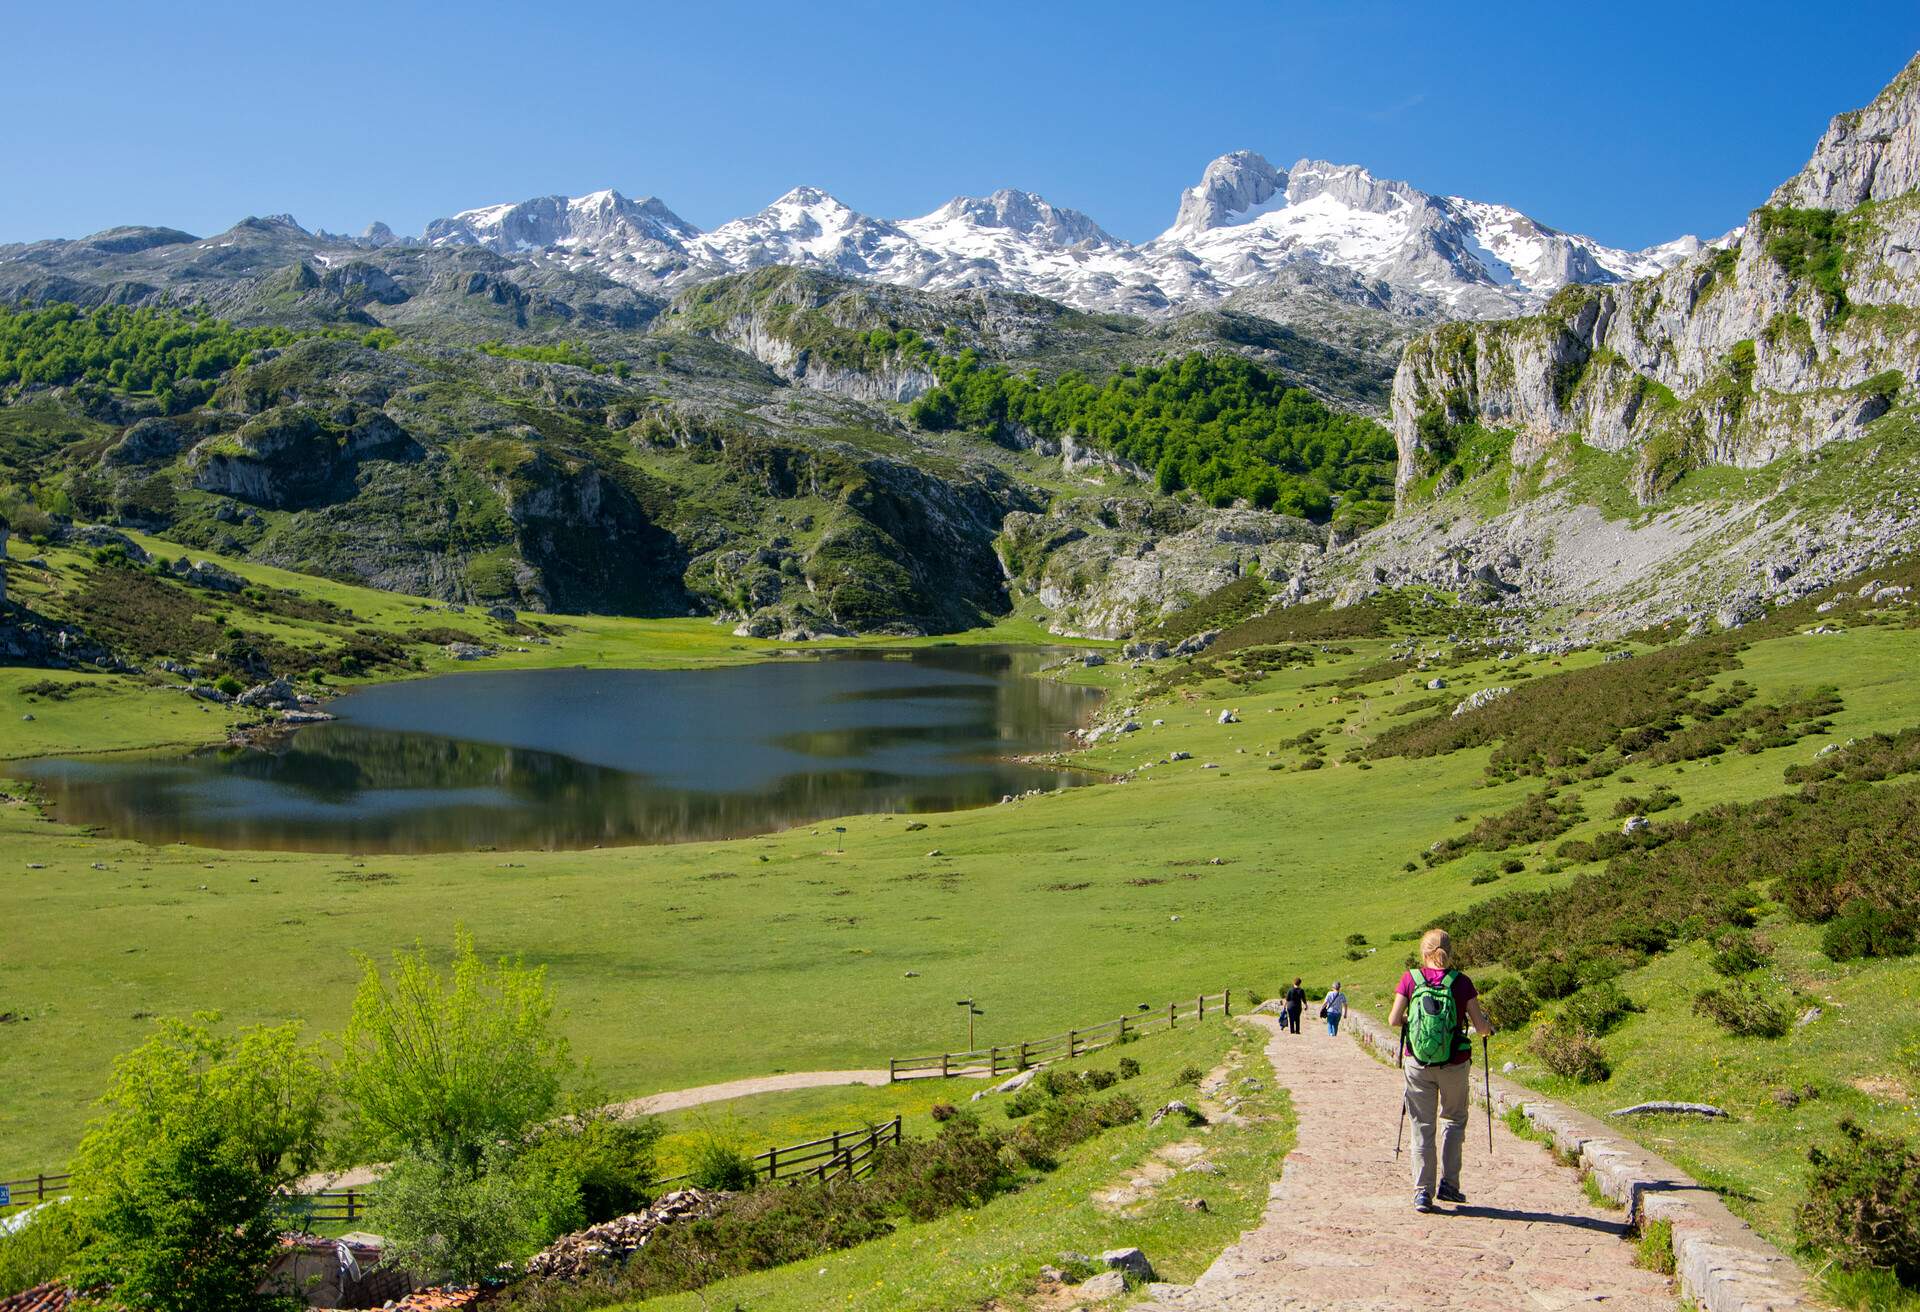 DEST_SPAIN_COVADONGA_THEME_HIKING_GettyImages-1182203652